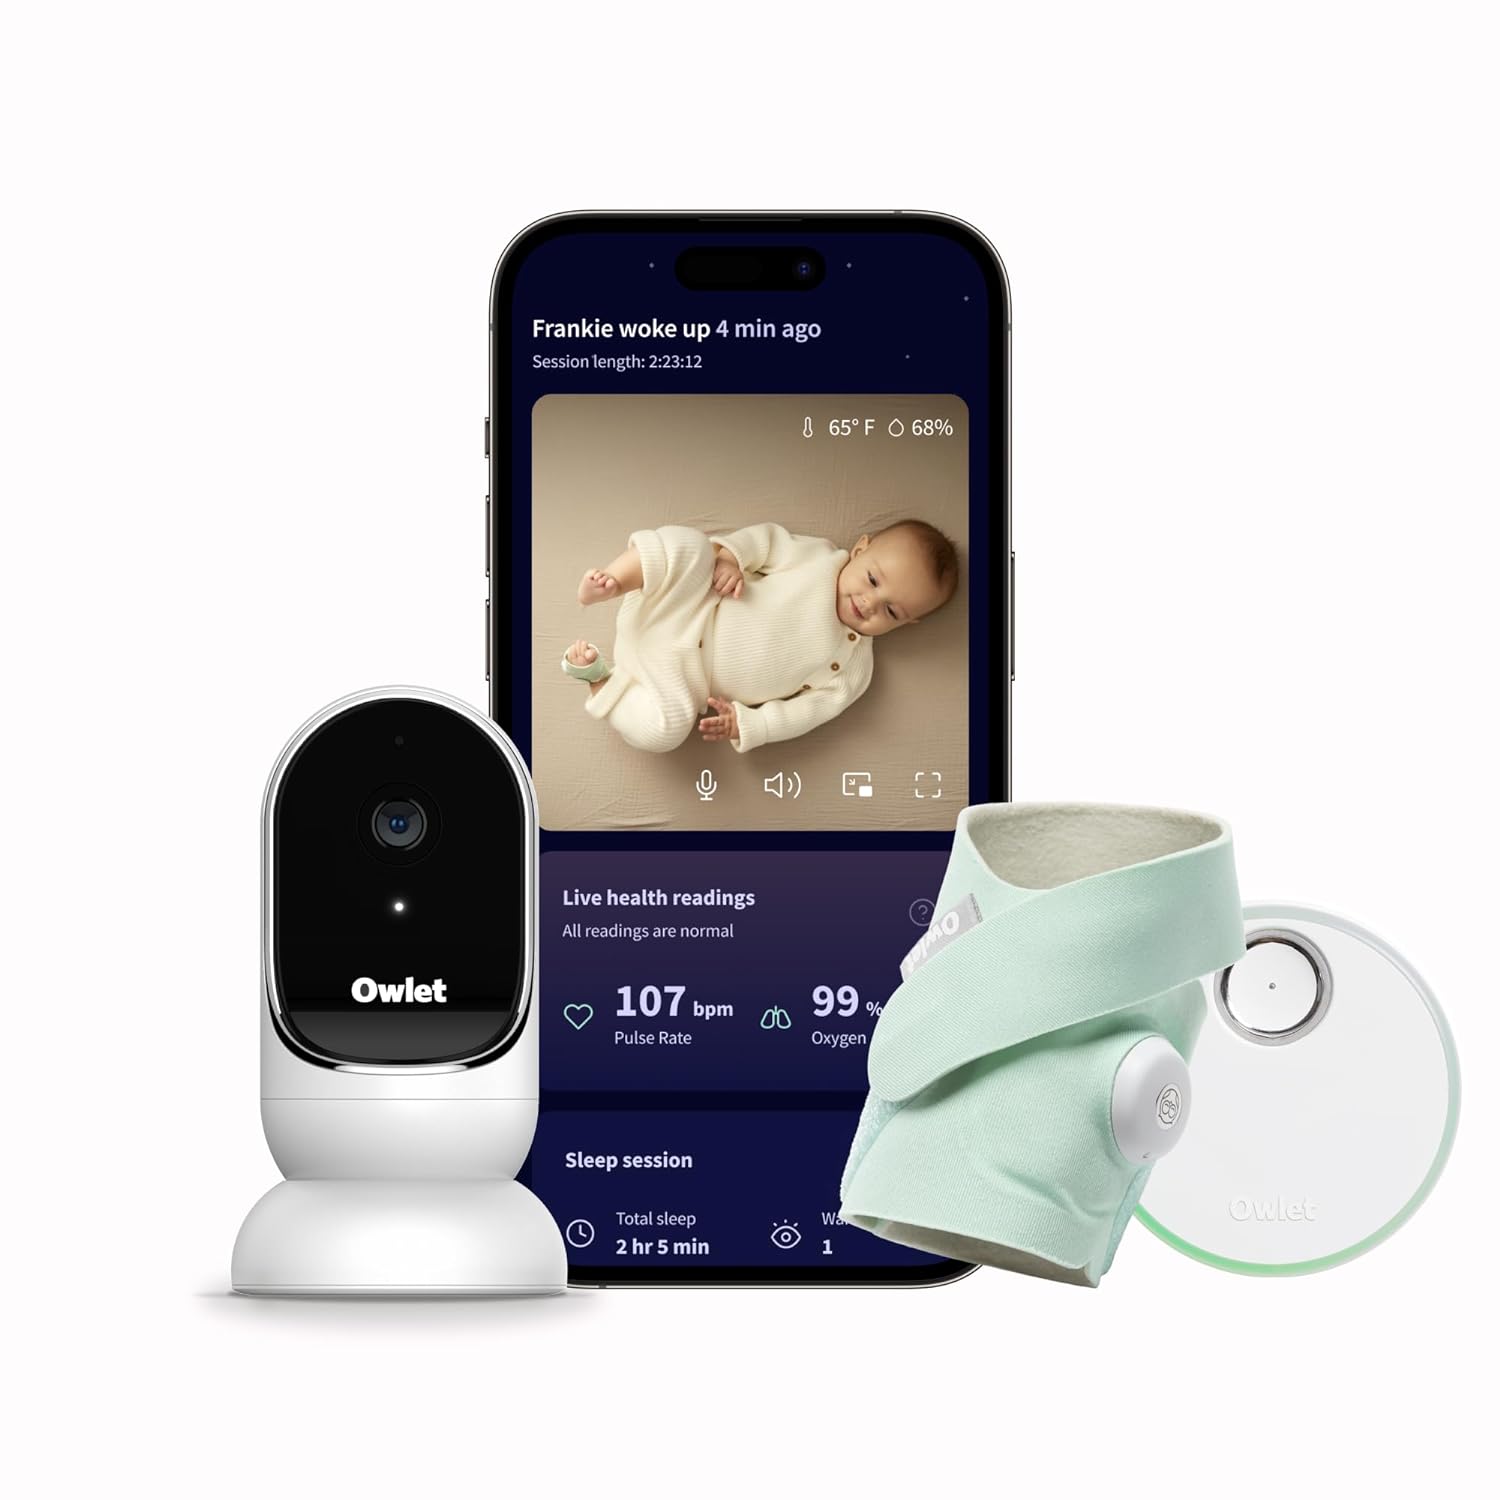 Best Baby Monitoring System: Top 5 Picks for Peace of Mind